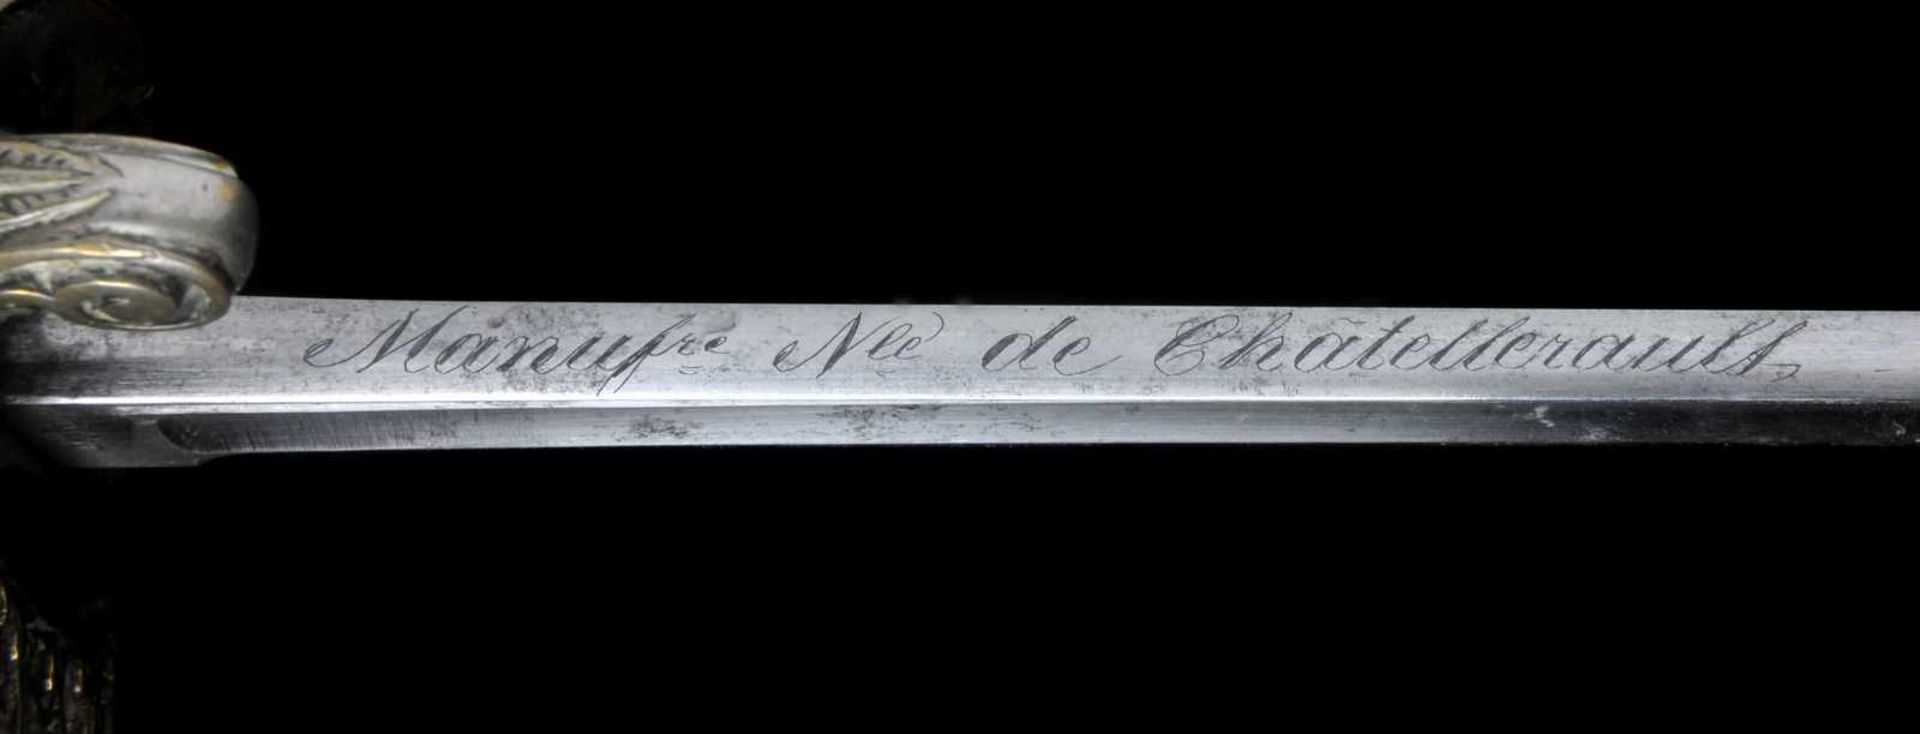 A FRENCH M1845 INFANTRY OFFICER’S SABER, BEFORE CHANGES IN 1855. FRANCE, CHATELLERAULT. Sabre d’ - Bild 3 aus 17